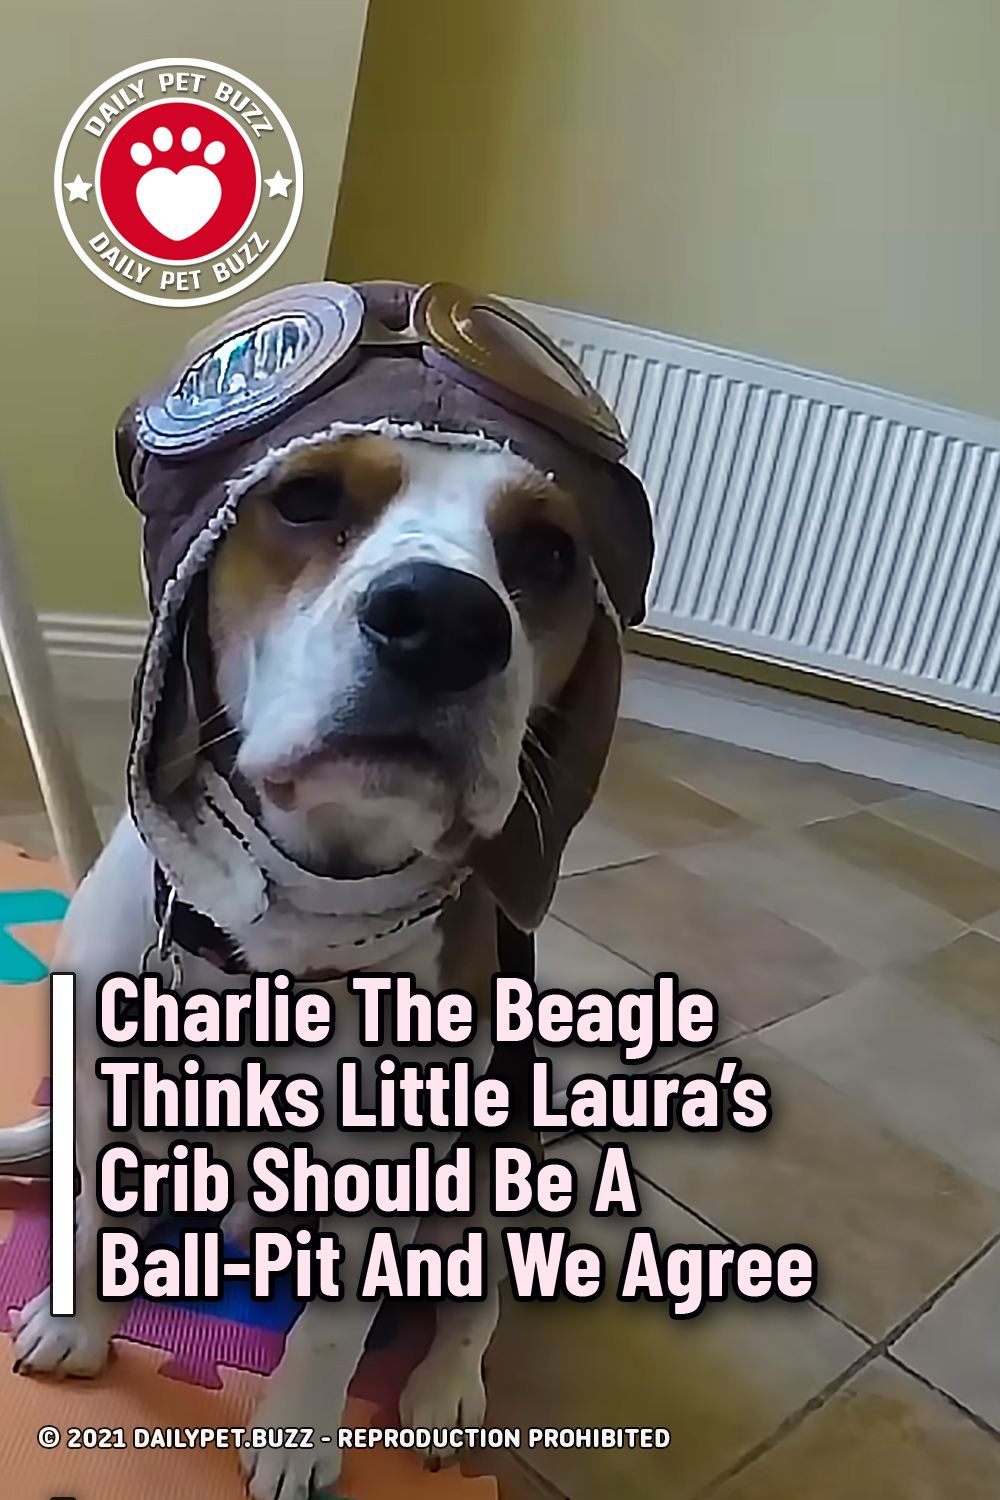 Charlie The Beagle Thinks Little Laura\'s Crib Should Be A Ball-Pit And We Agree